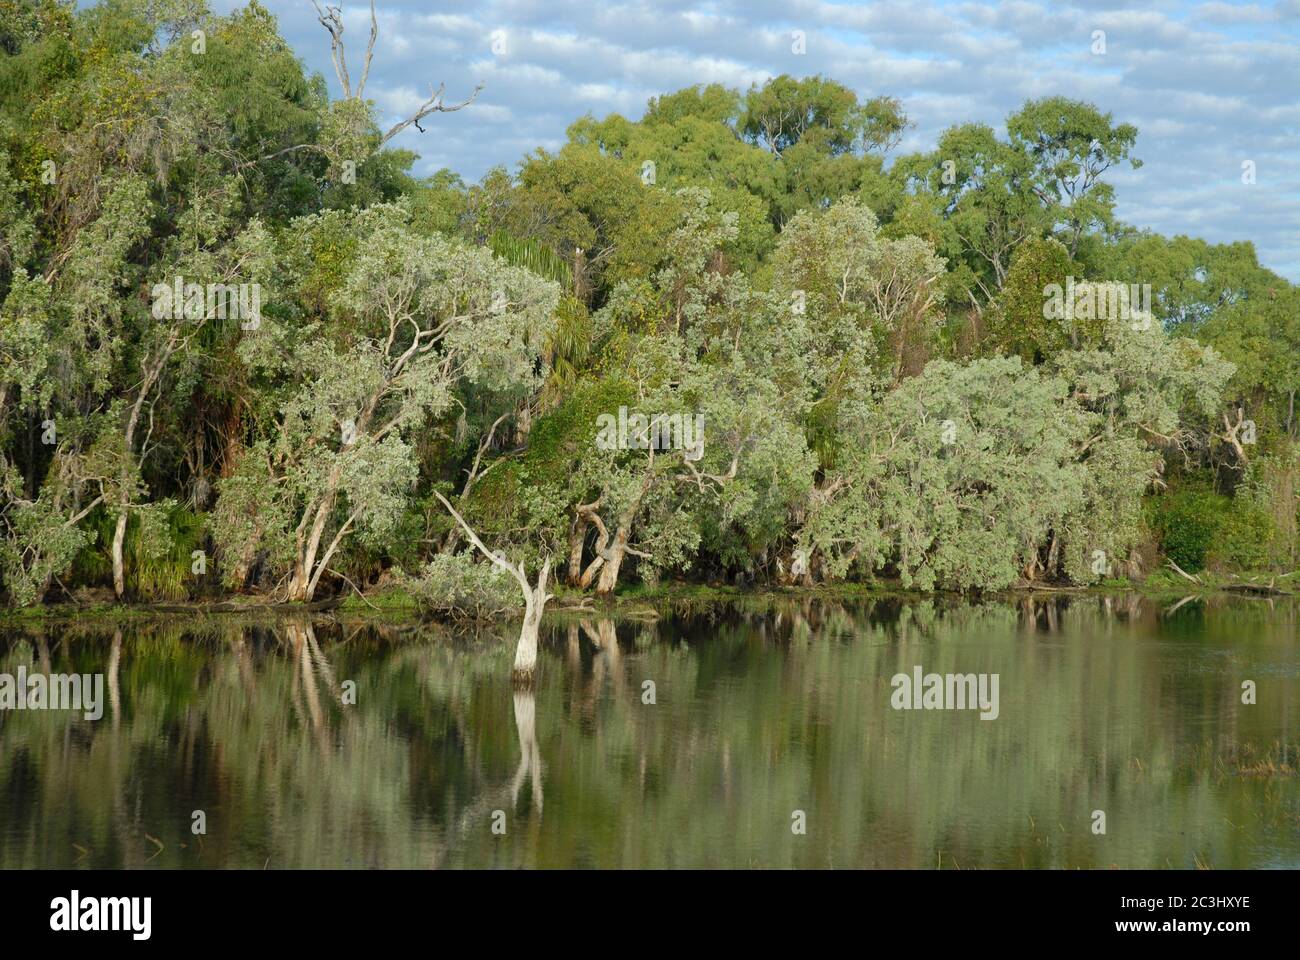 Stunning green sub-tropical  landscape of trees reflected in  flood water near Crocodile Creek, Cape Cleveland, Queensland, Australia Stock Photo